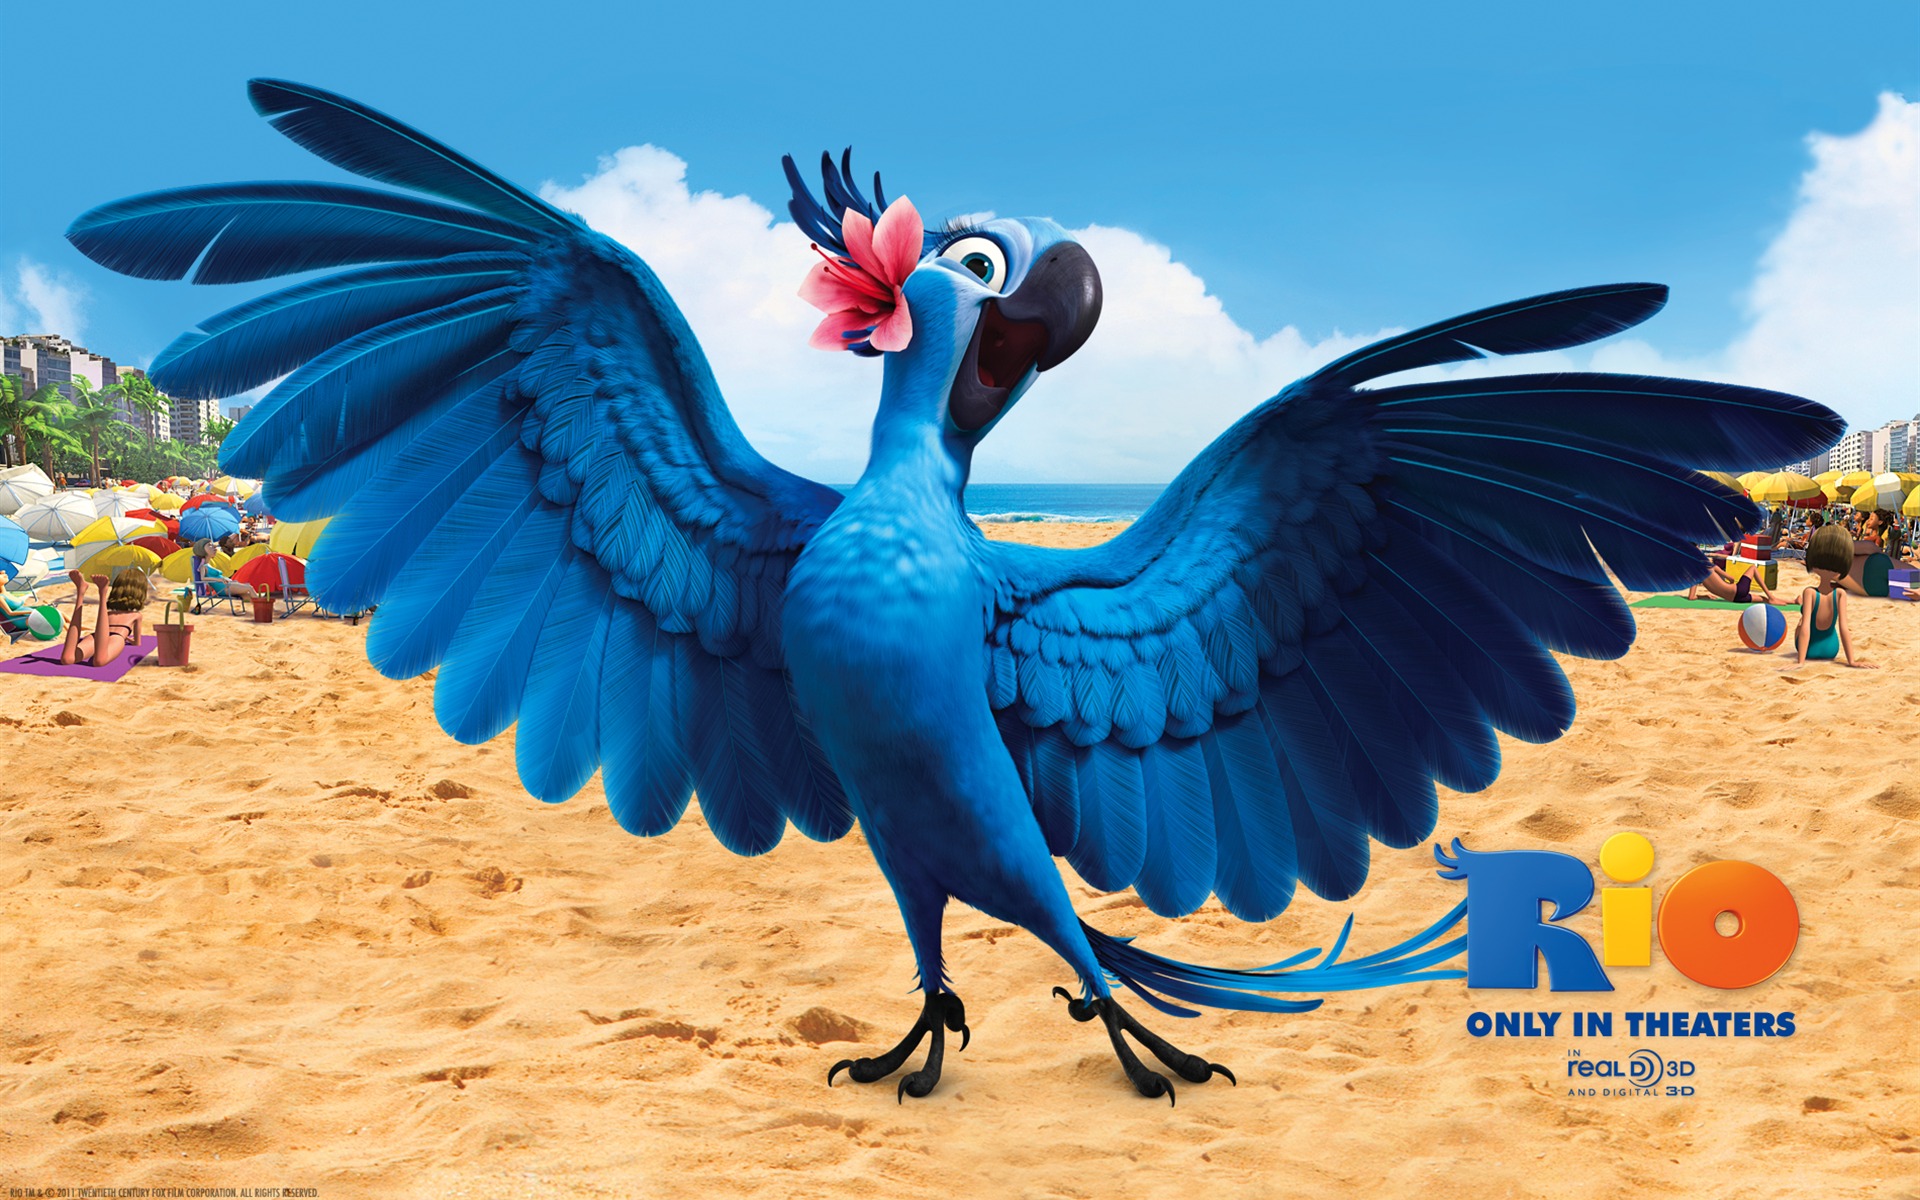 Rio 2011 wallpapers #1 - 1920x1200